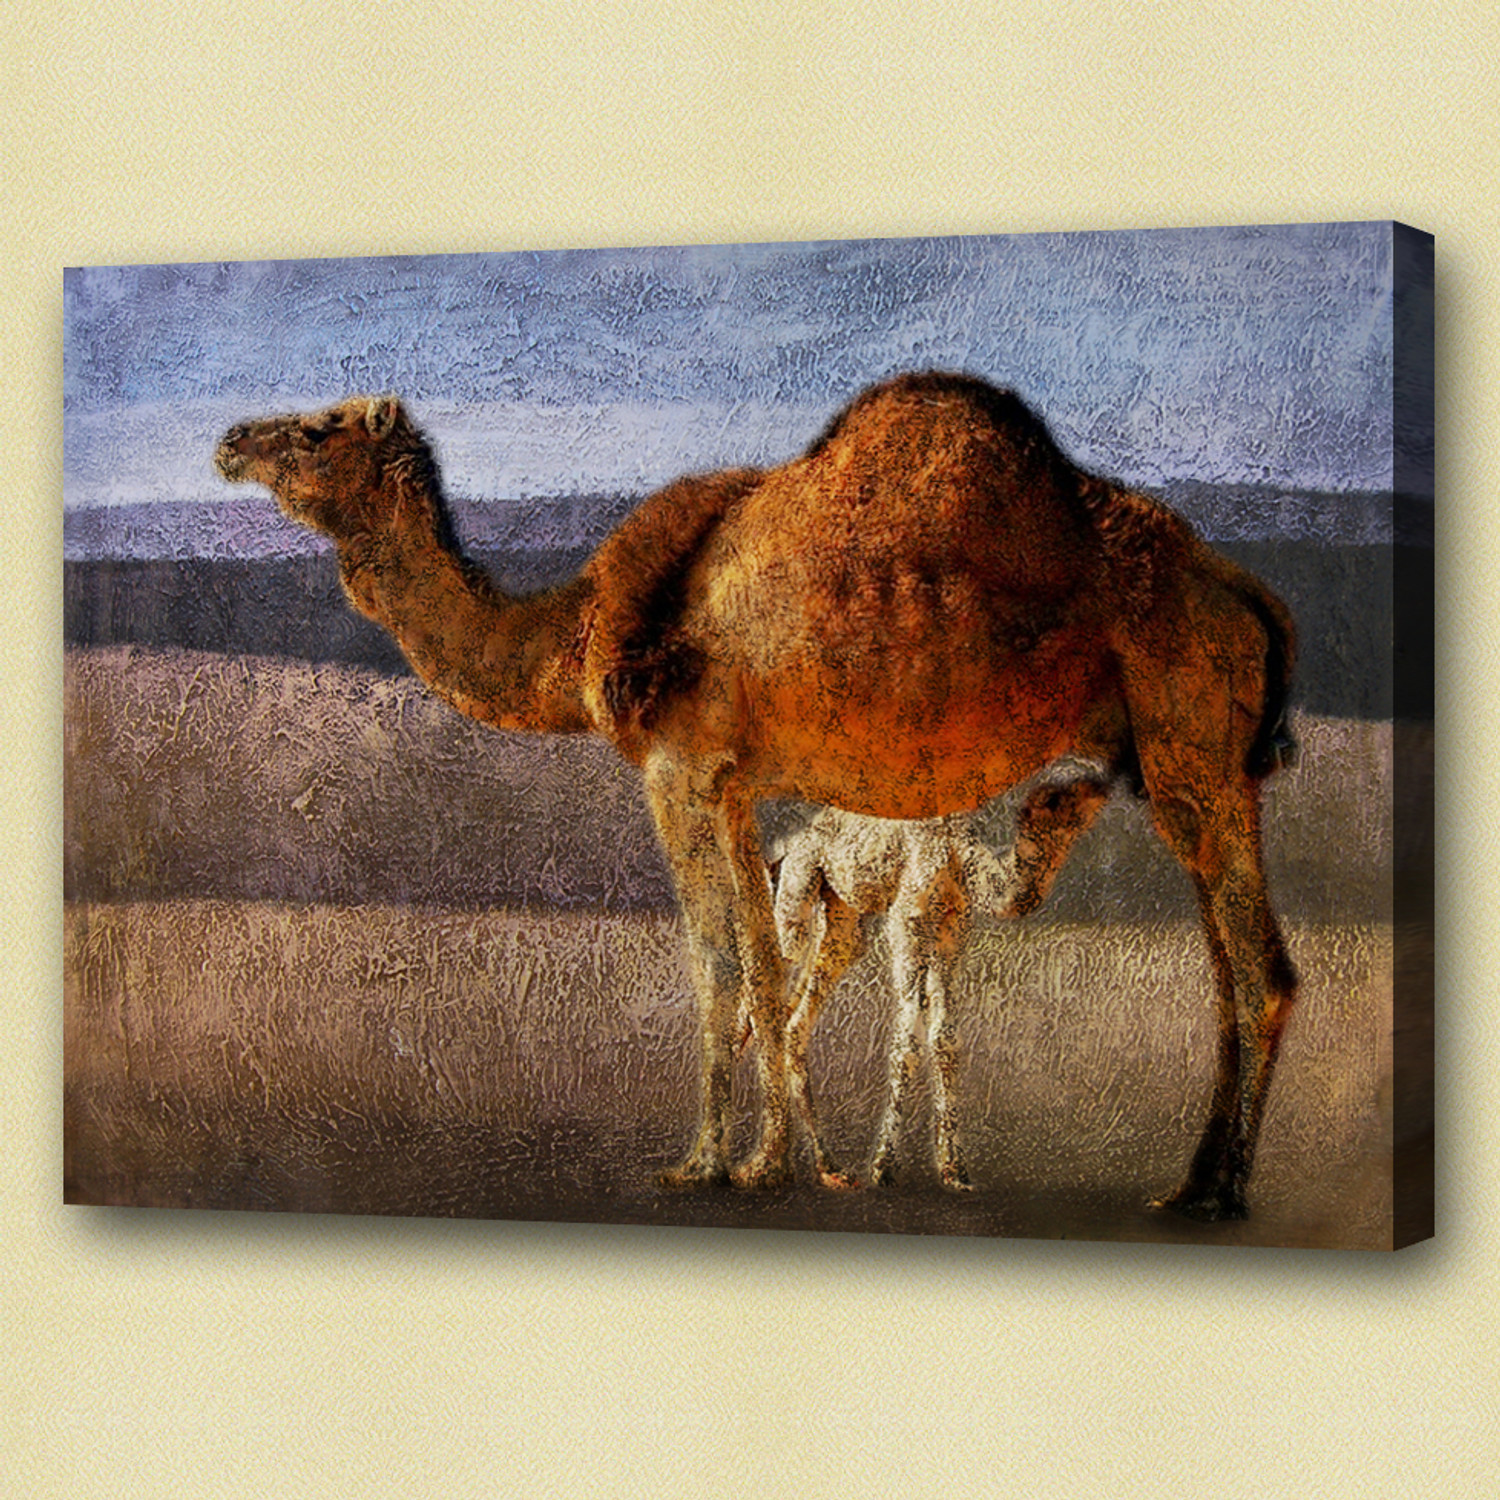 Buy Camel Canvas Boards Individual canvas Online in India